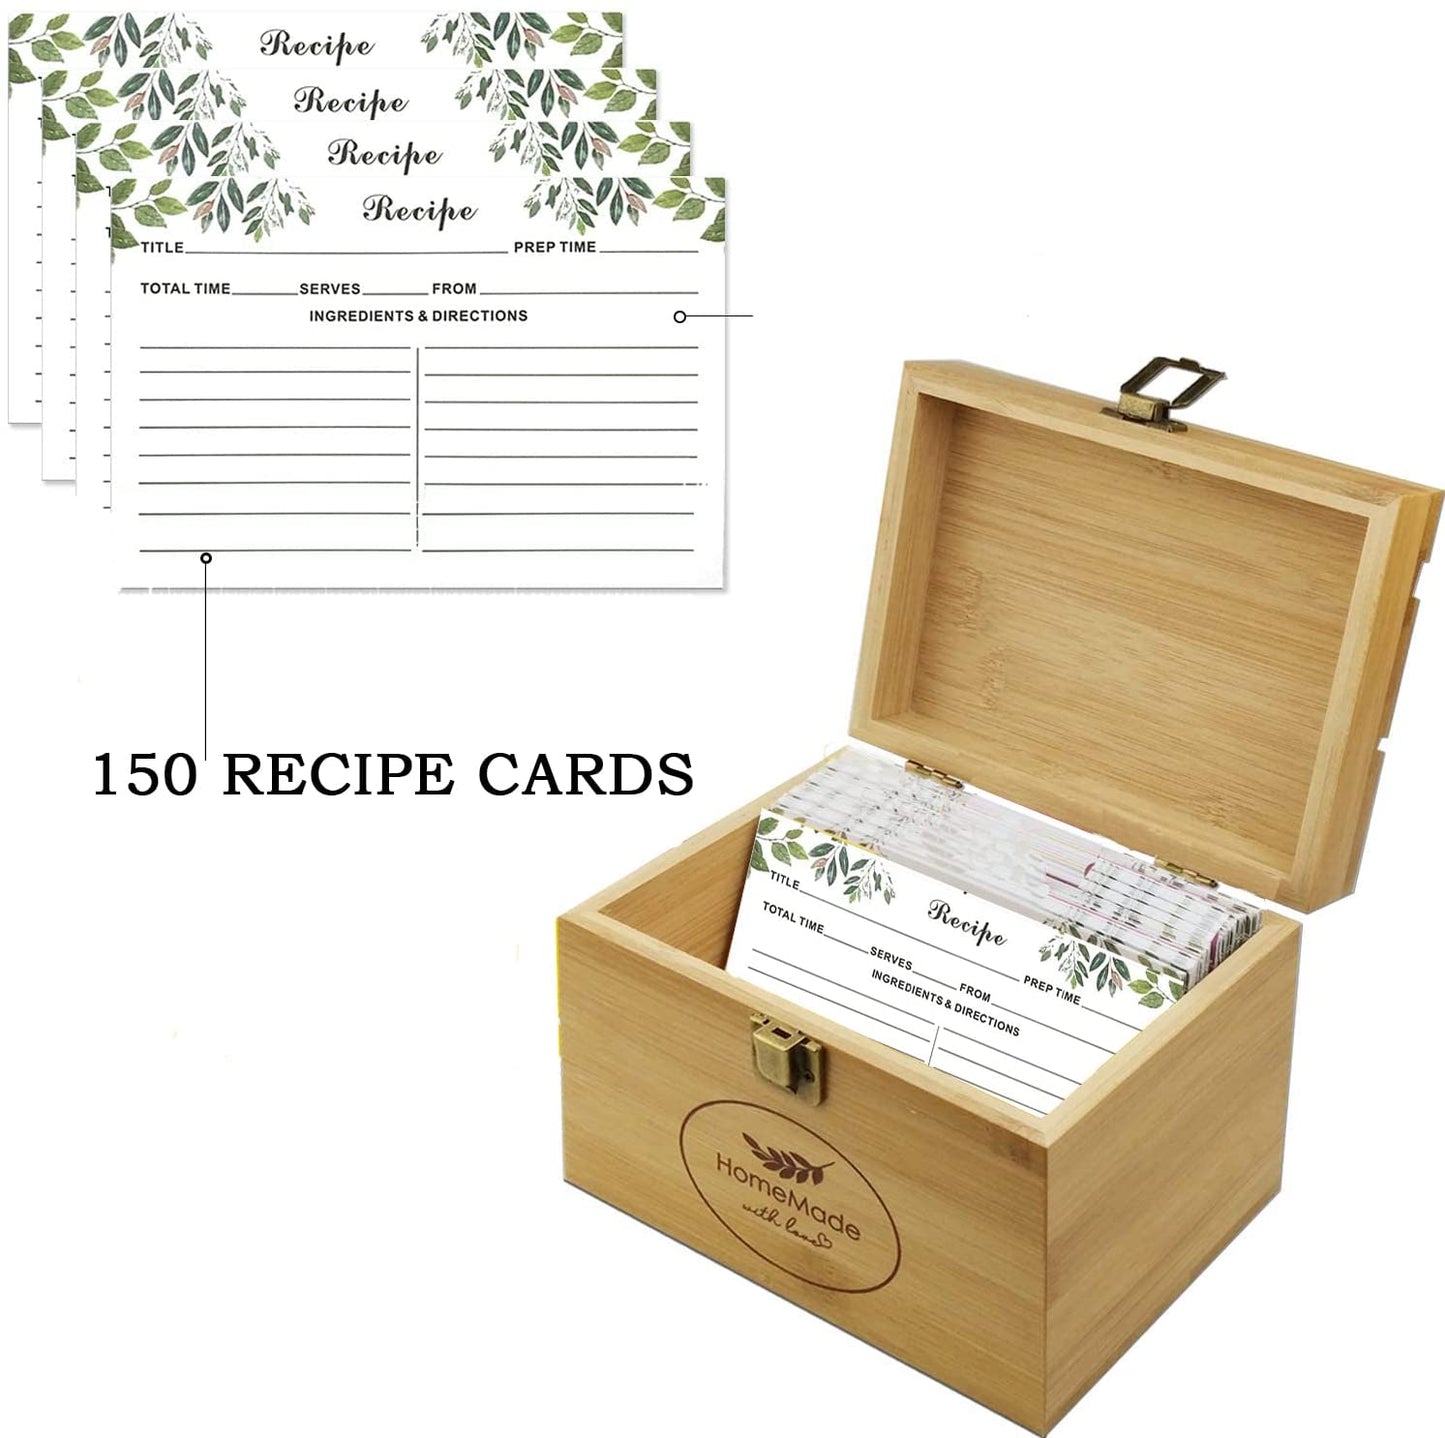 Recipe Box with Cards - 150 4x6 inches Double Sided Recipe Cards and Recipe box - Eco Friendly Bamboo manufacture. For Kitchen, or Ideal gift.